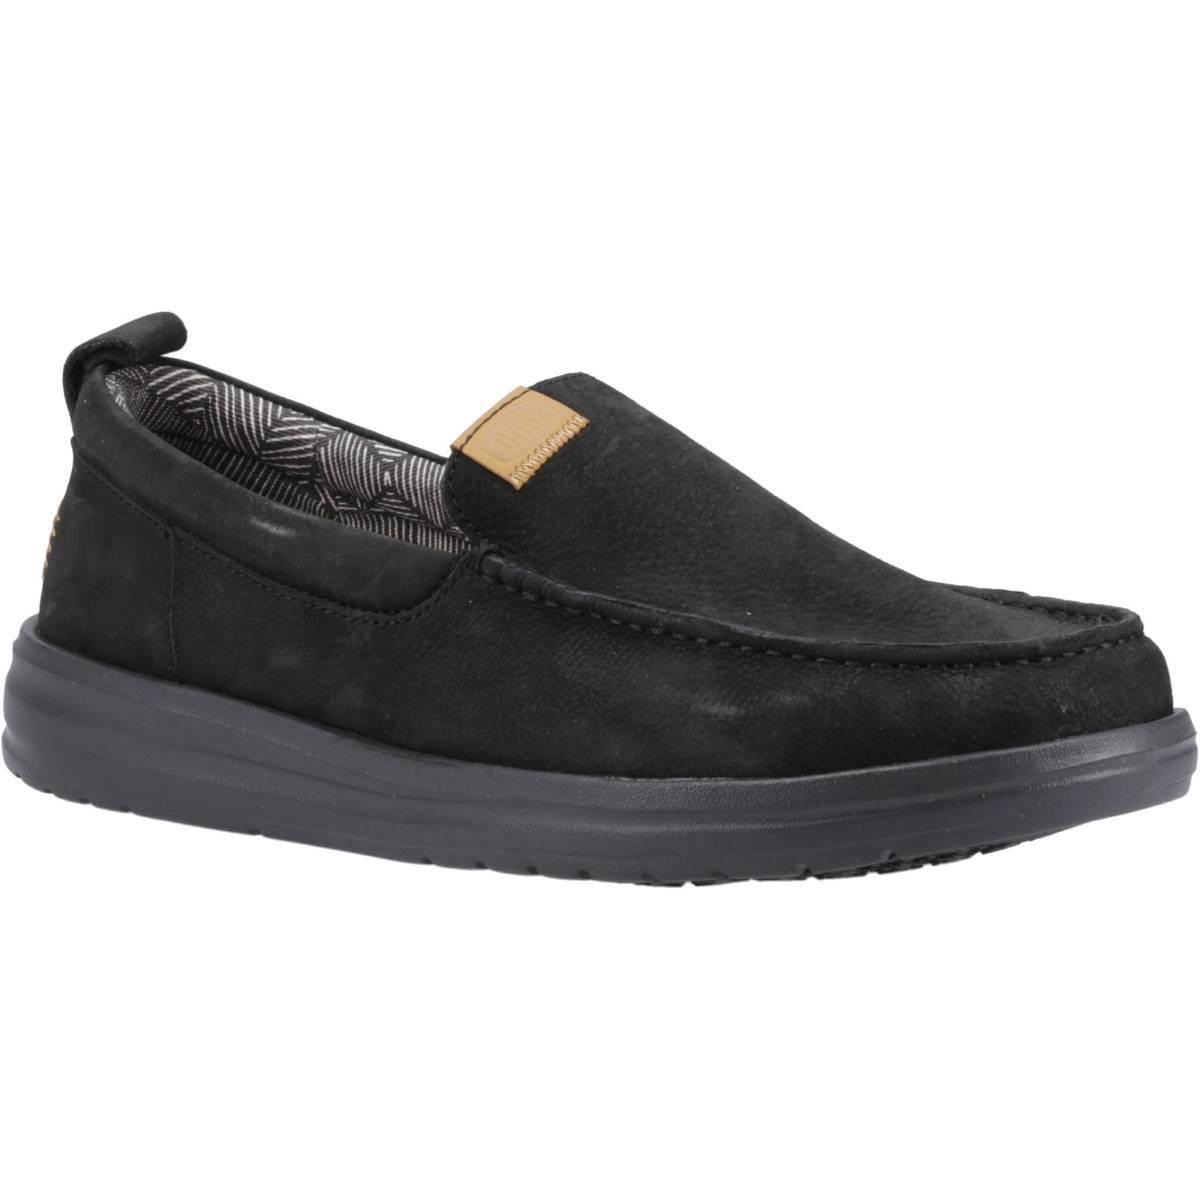 Hey Dude Wally Grip Moc Craft Leather Black Mens Slip-on Shoes 40173-001